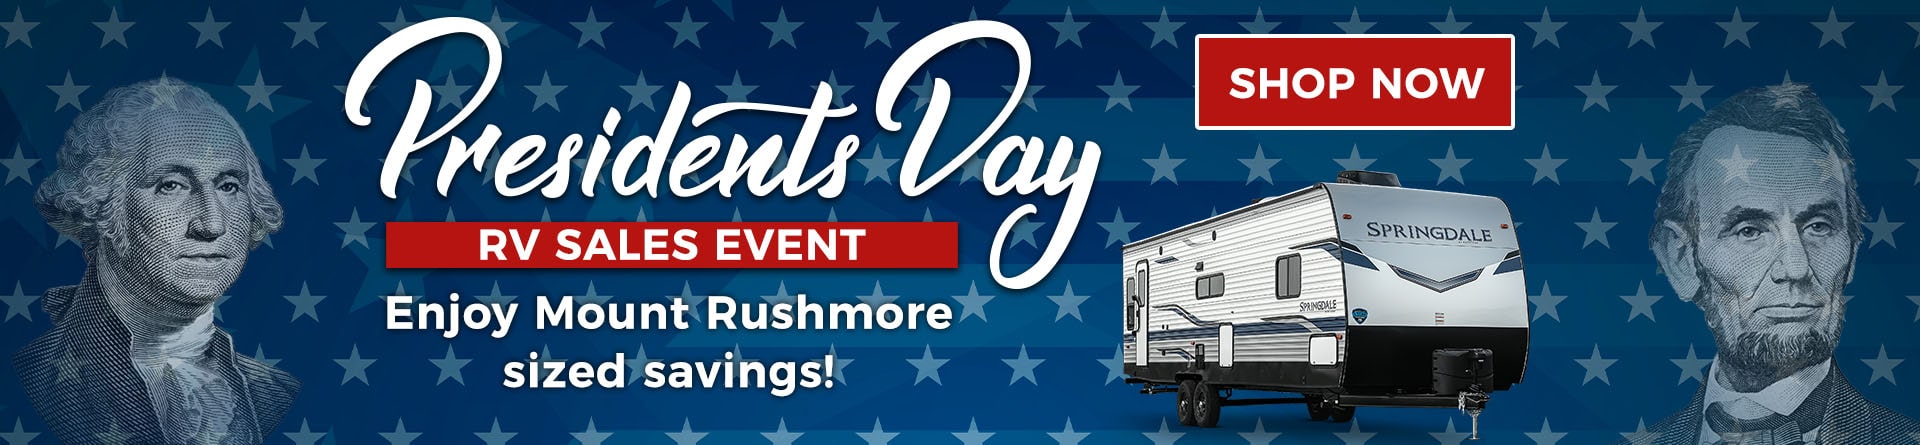 President's Day Sales Event